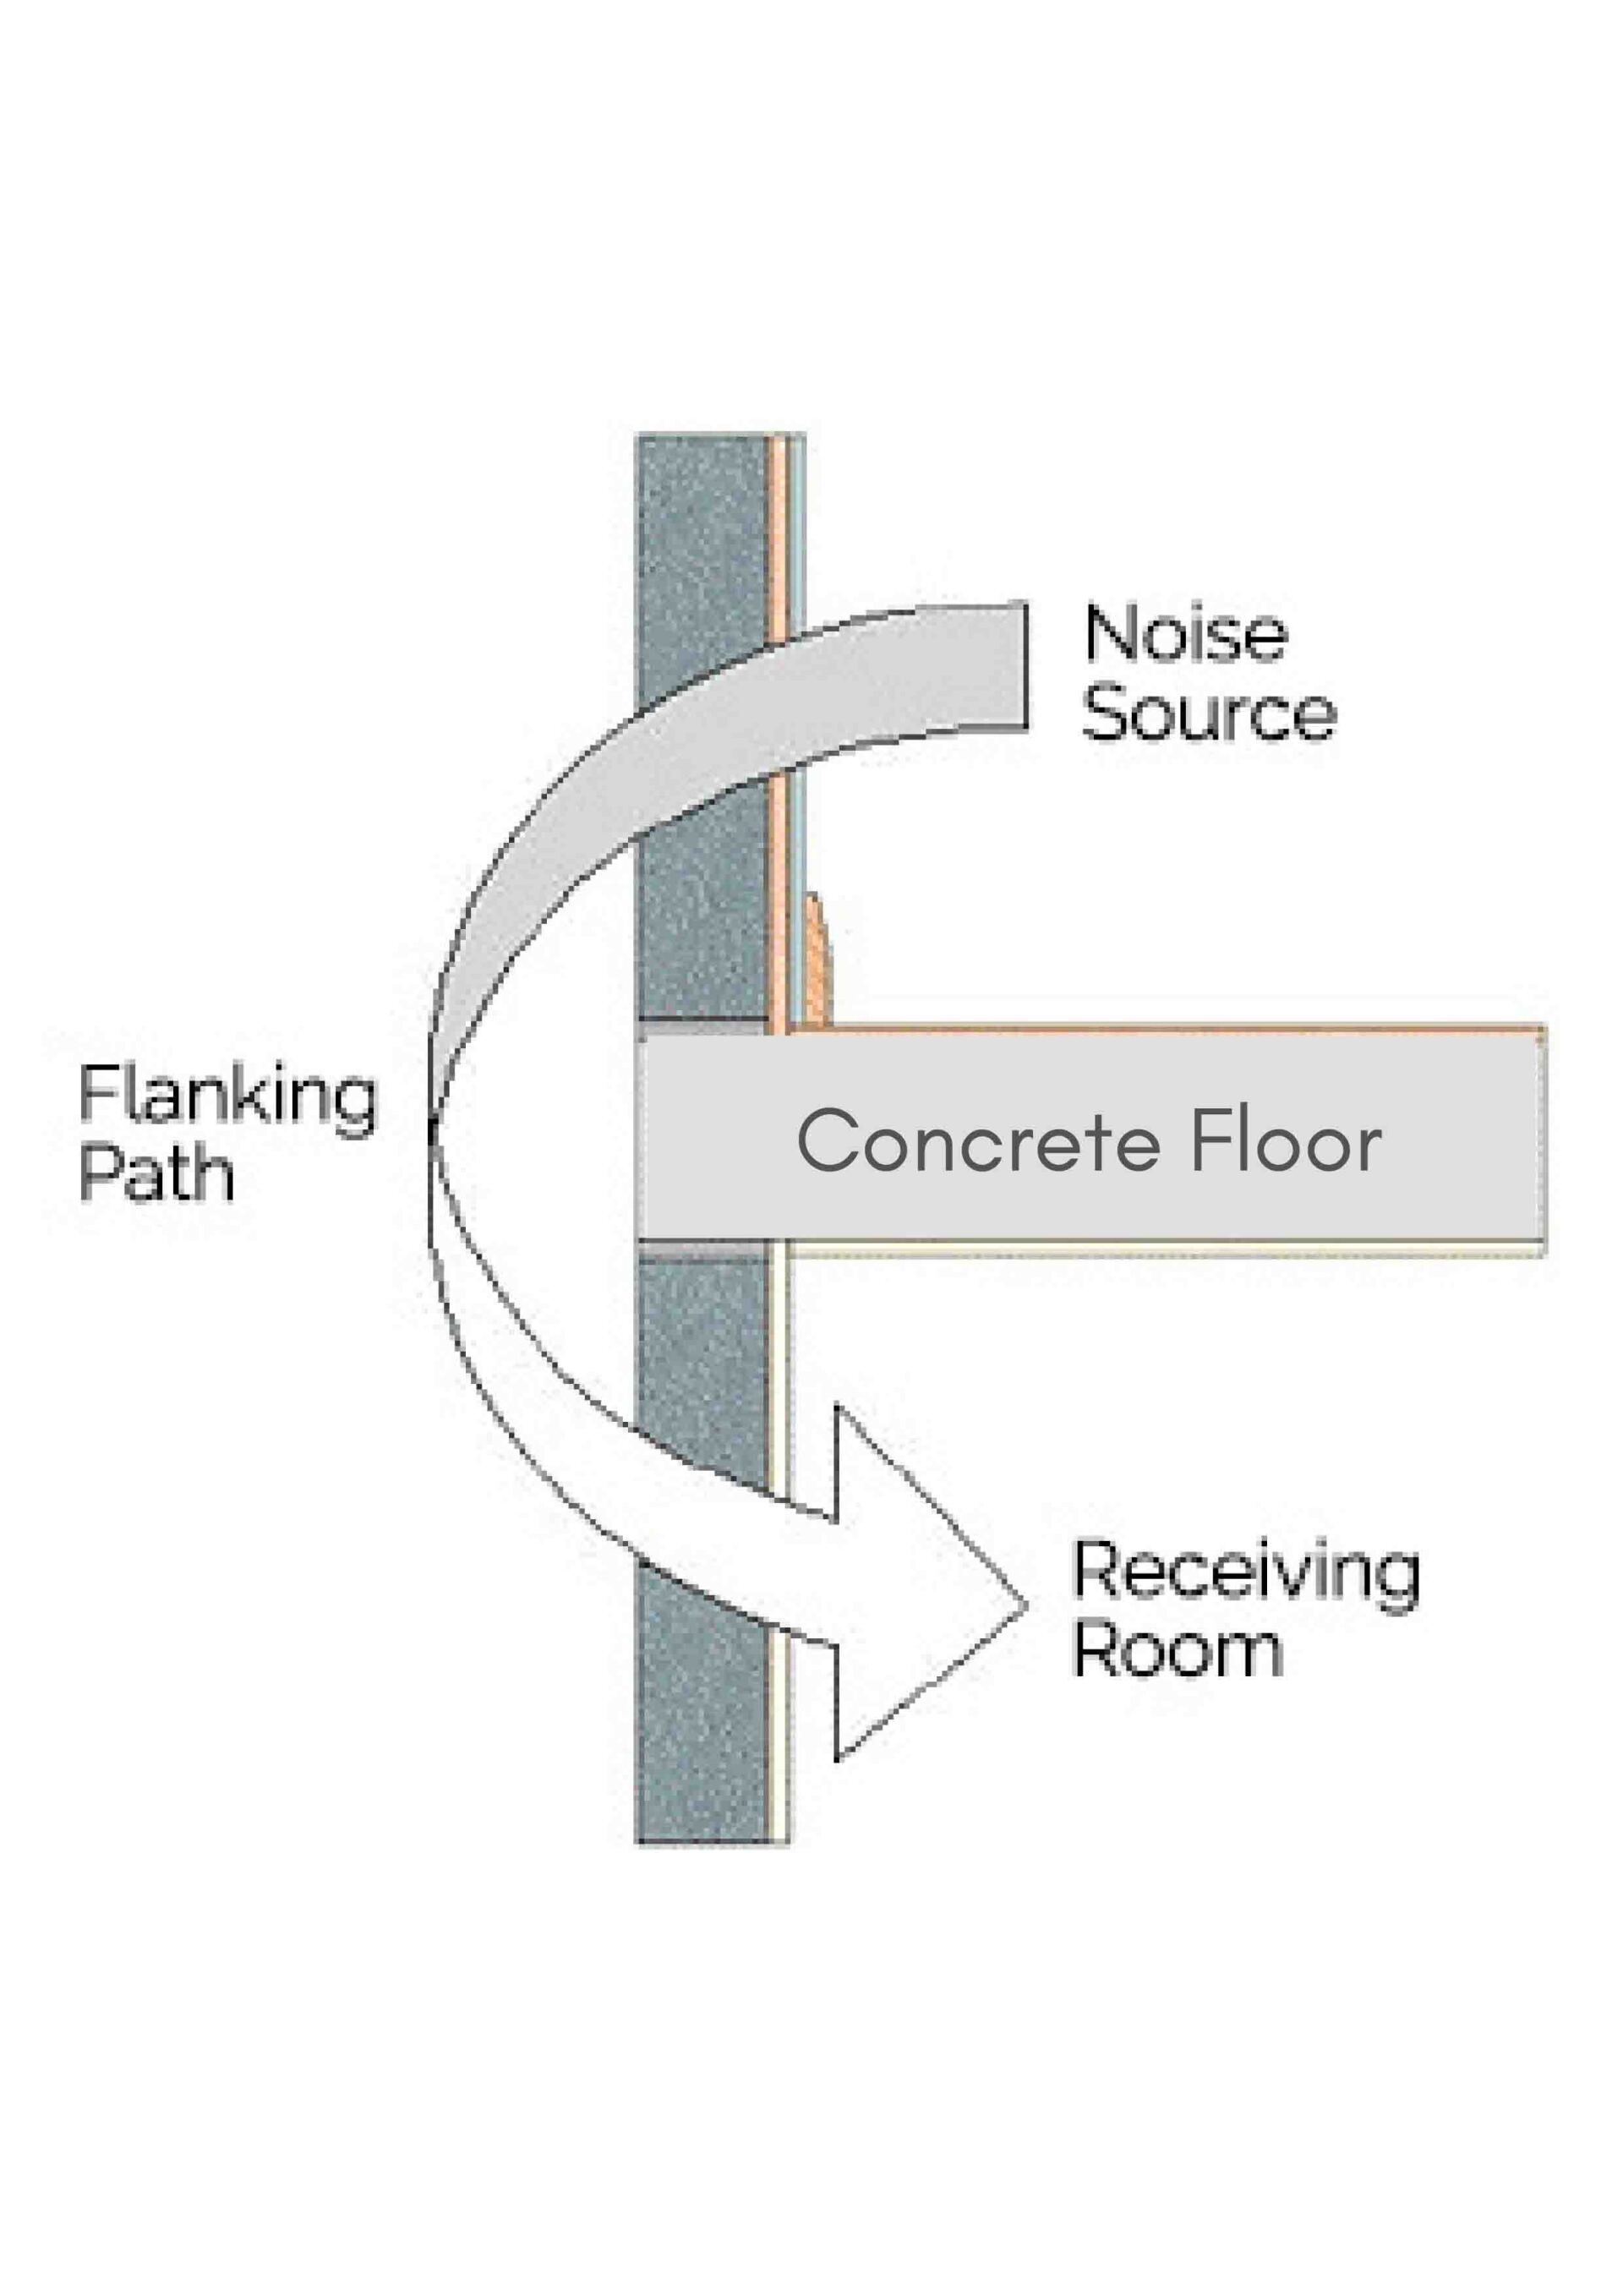 Flanking and Concrete Floors